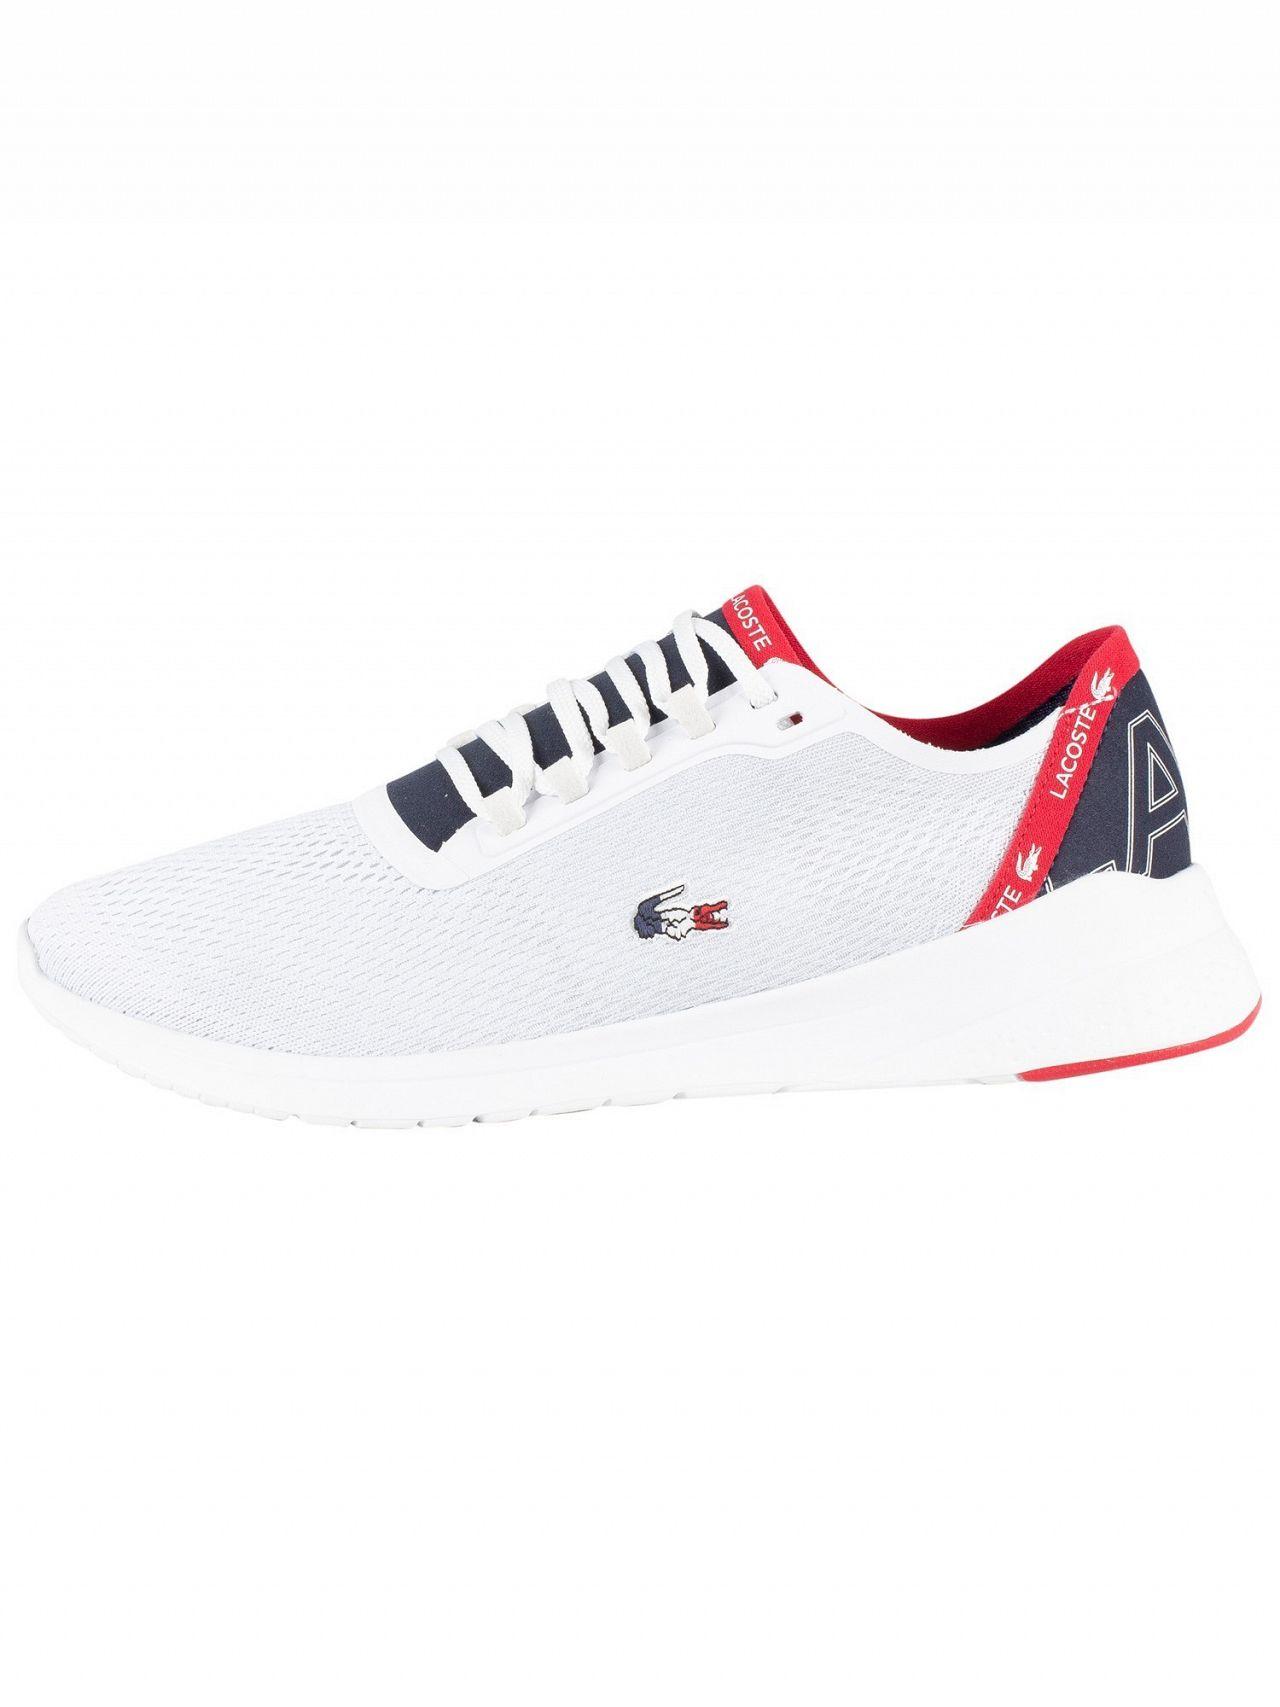 Lacoste Synthetic Lt Fit Sneaker in White/Navy/Red (White) for Men | Lyst